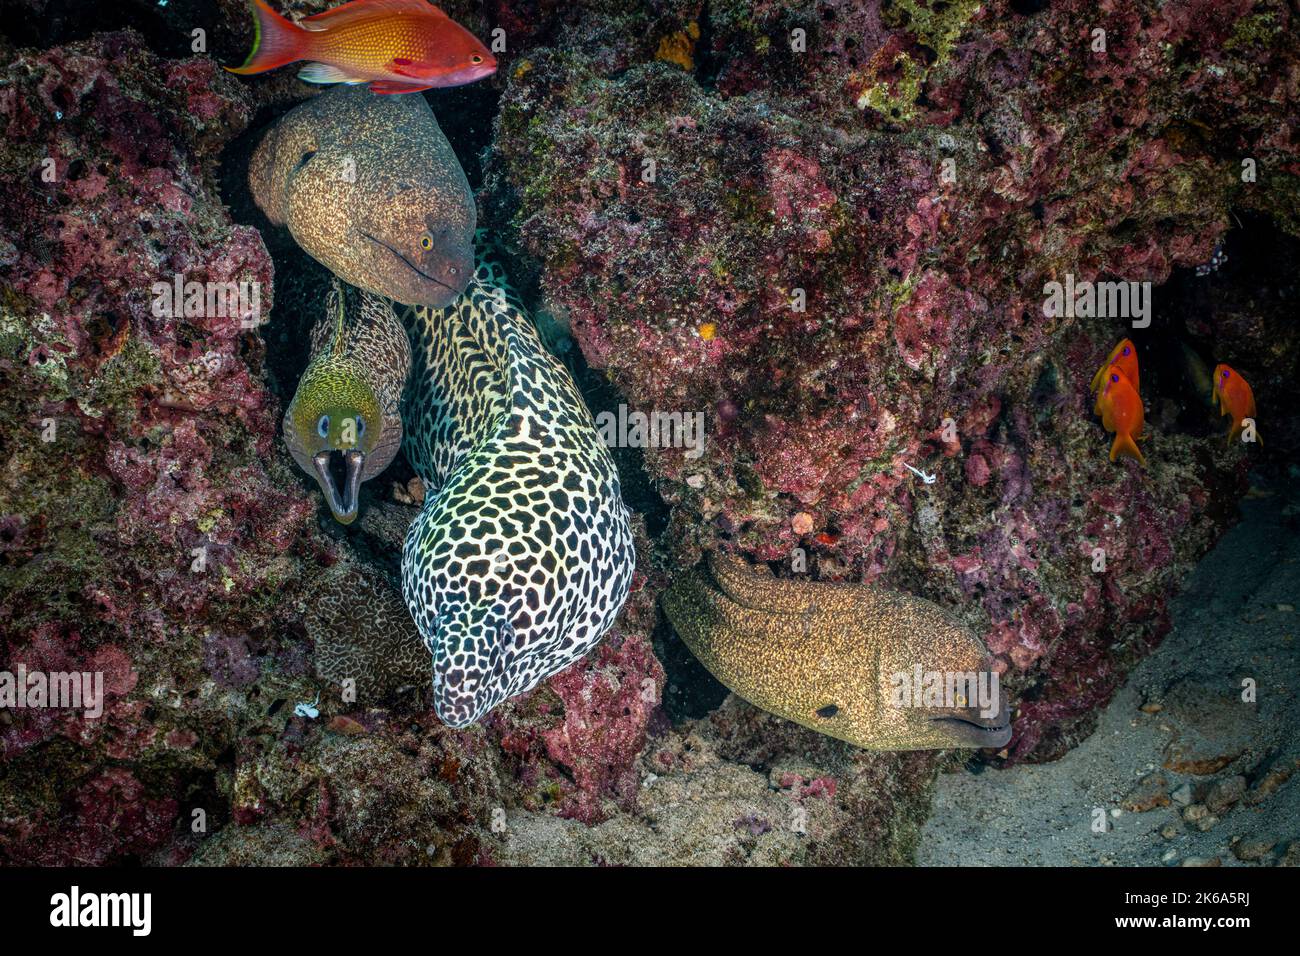 Four eels share the same den in a rocky reef, Maldives. Stock Photo